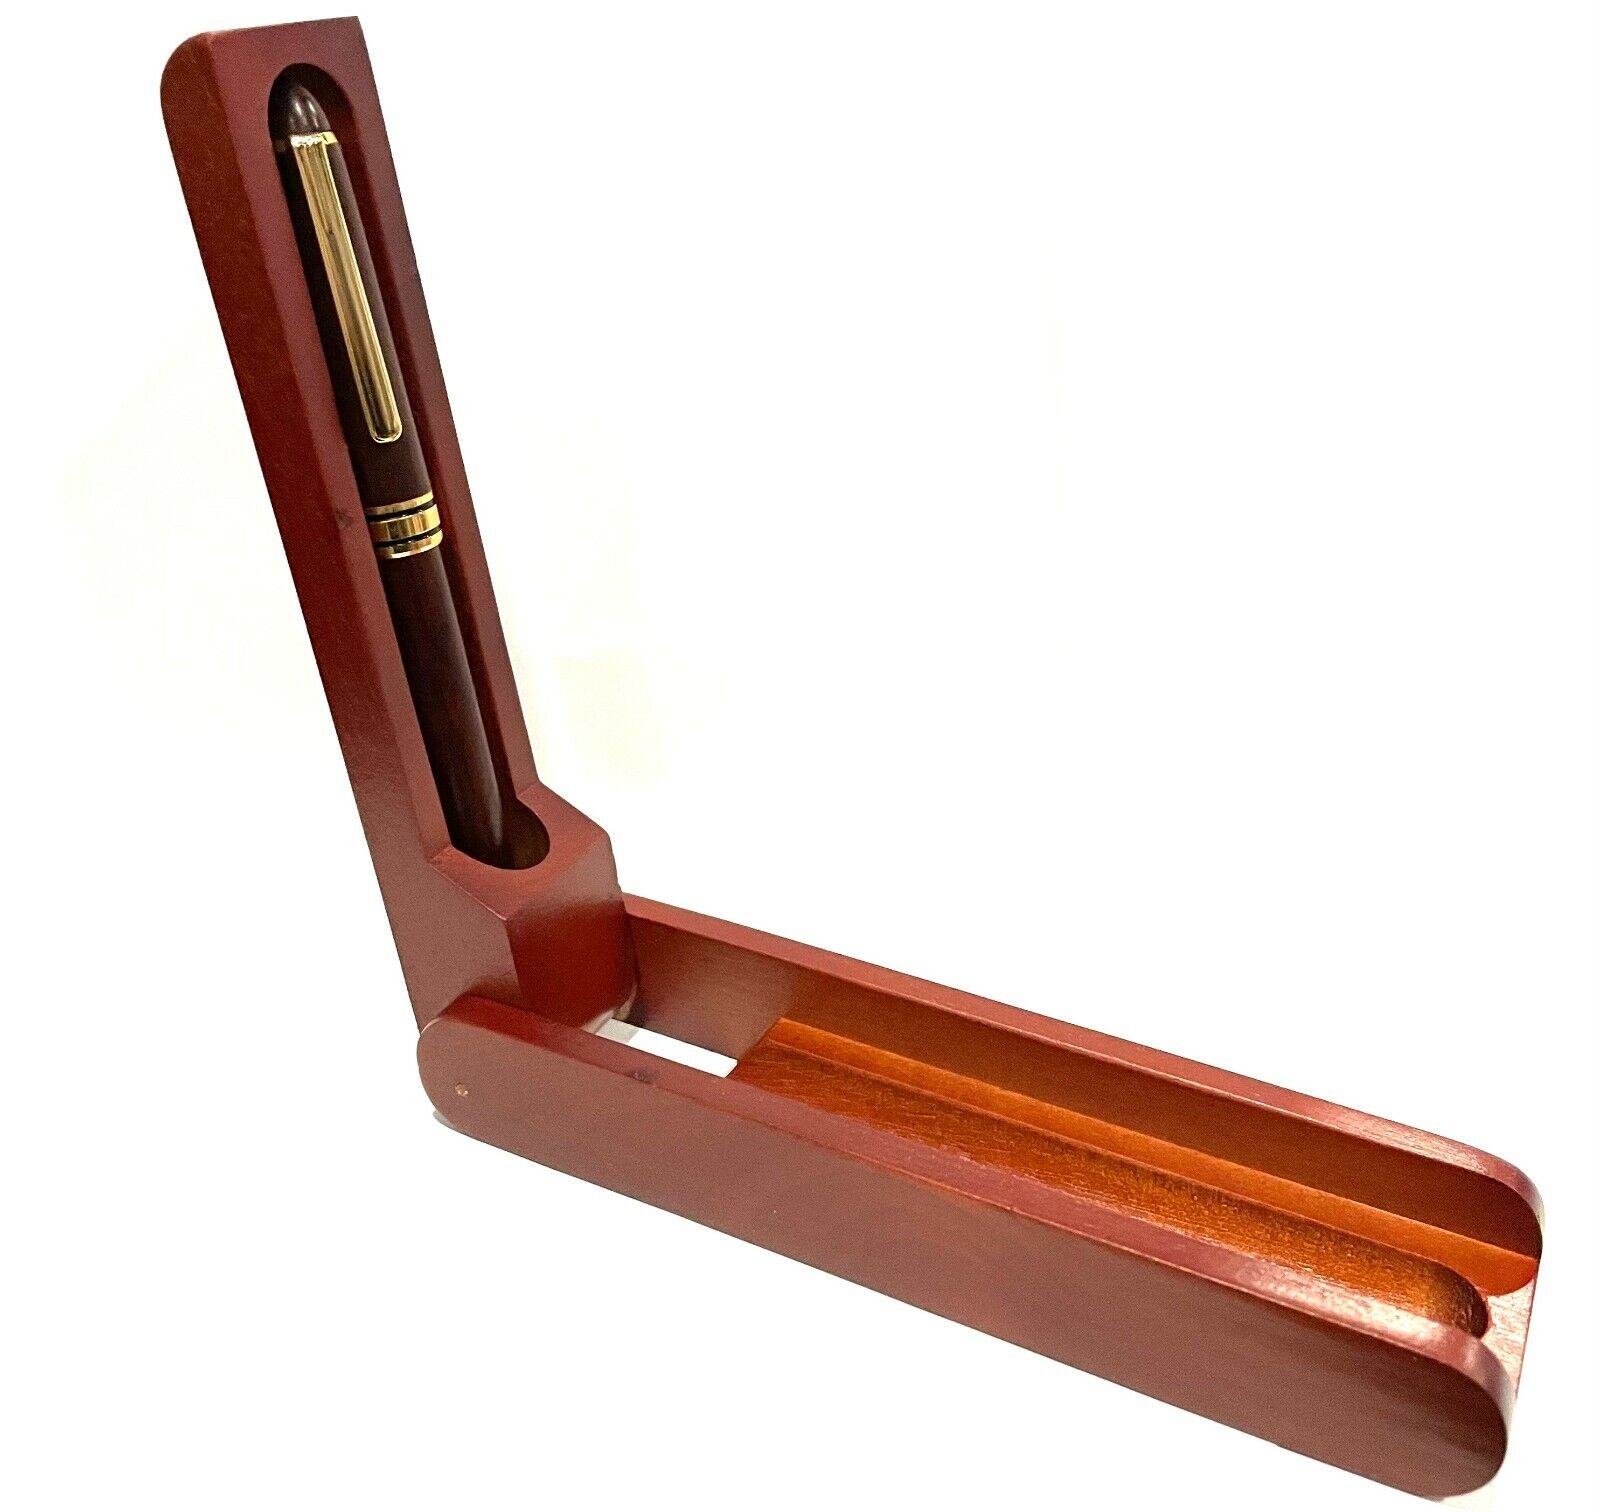 Luxury Rosewood Ballpoint Pen With Gold Tone Accents And Rosewood Case/Stand